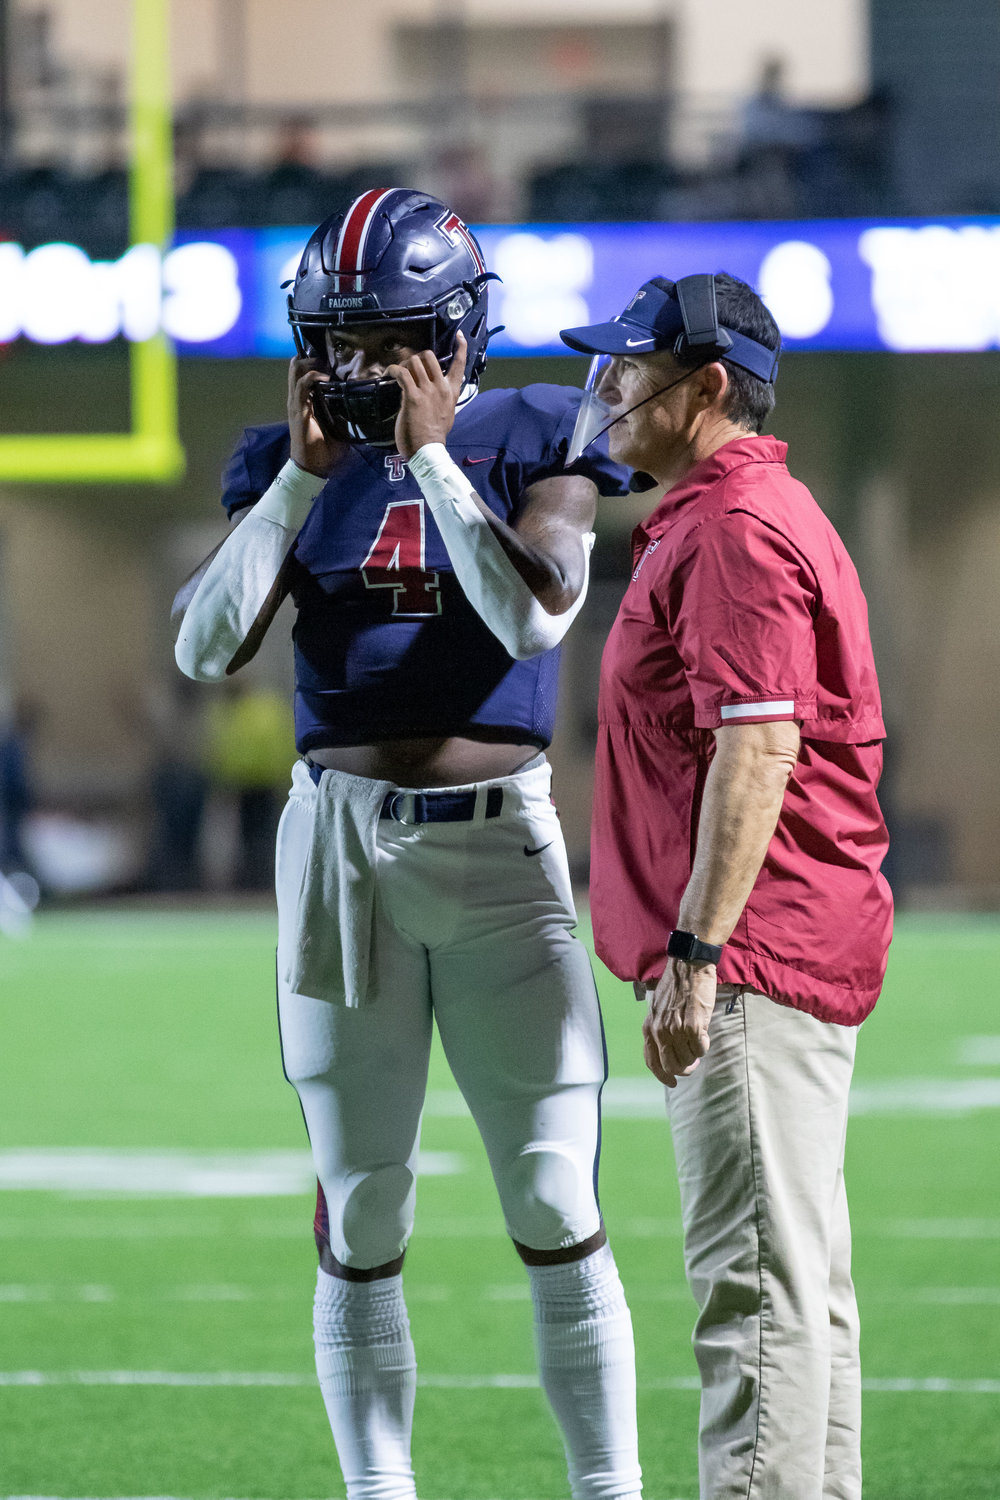 Tompkins senior quarterback Jalen Milroe, left, and Tompkins head coach Todd McVey talk during a game earlier this season at Legacy Stadium. Milroe was named District 19-6A’s Most Valuable Player and McVey was named the district’s Coach of the Year.